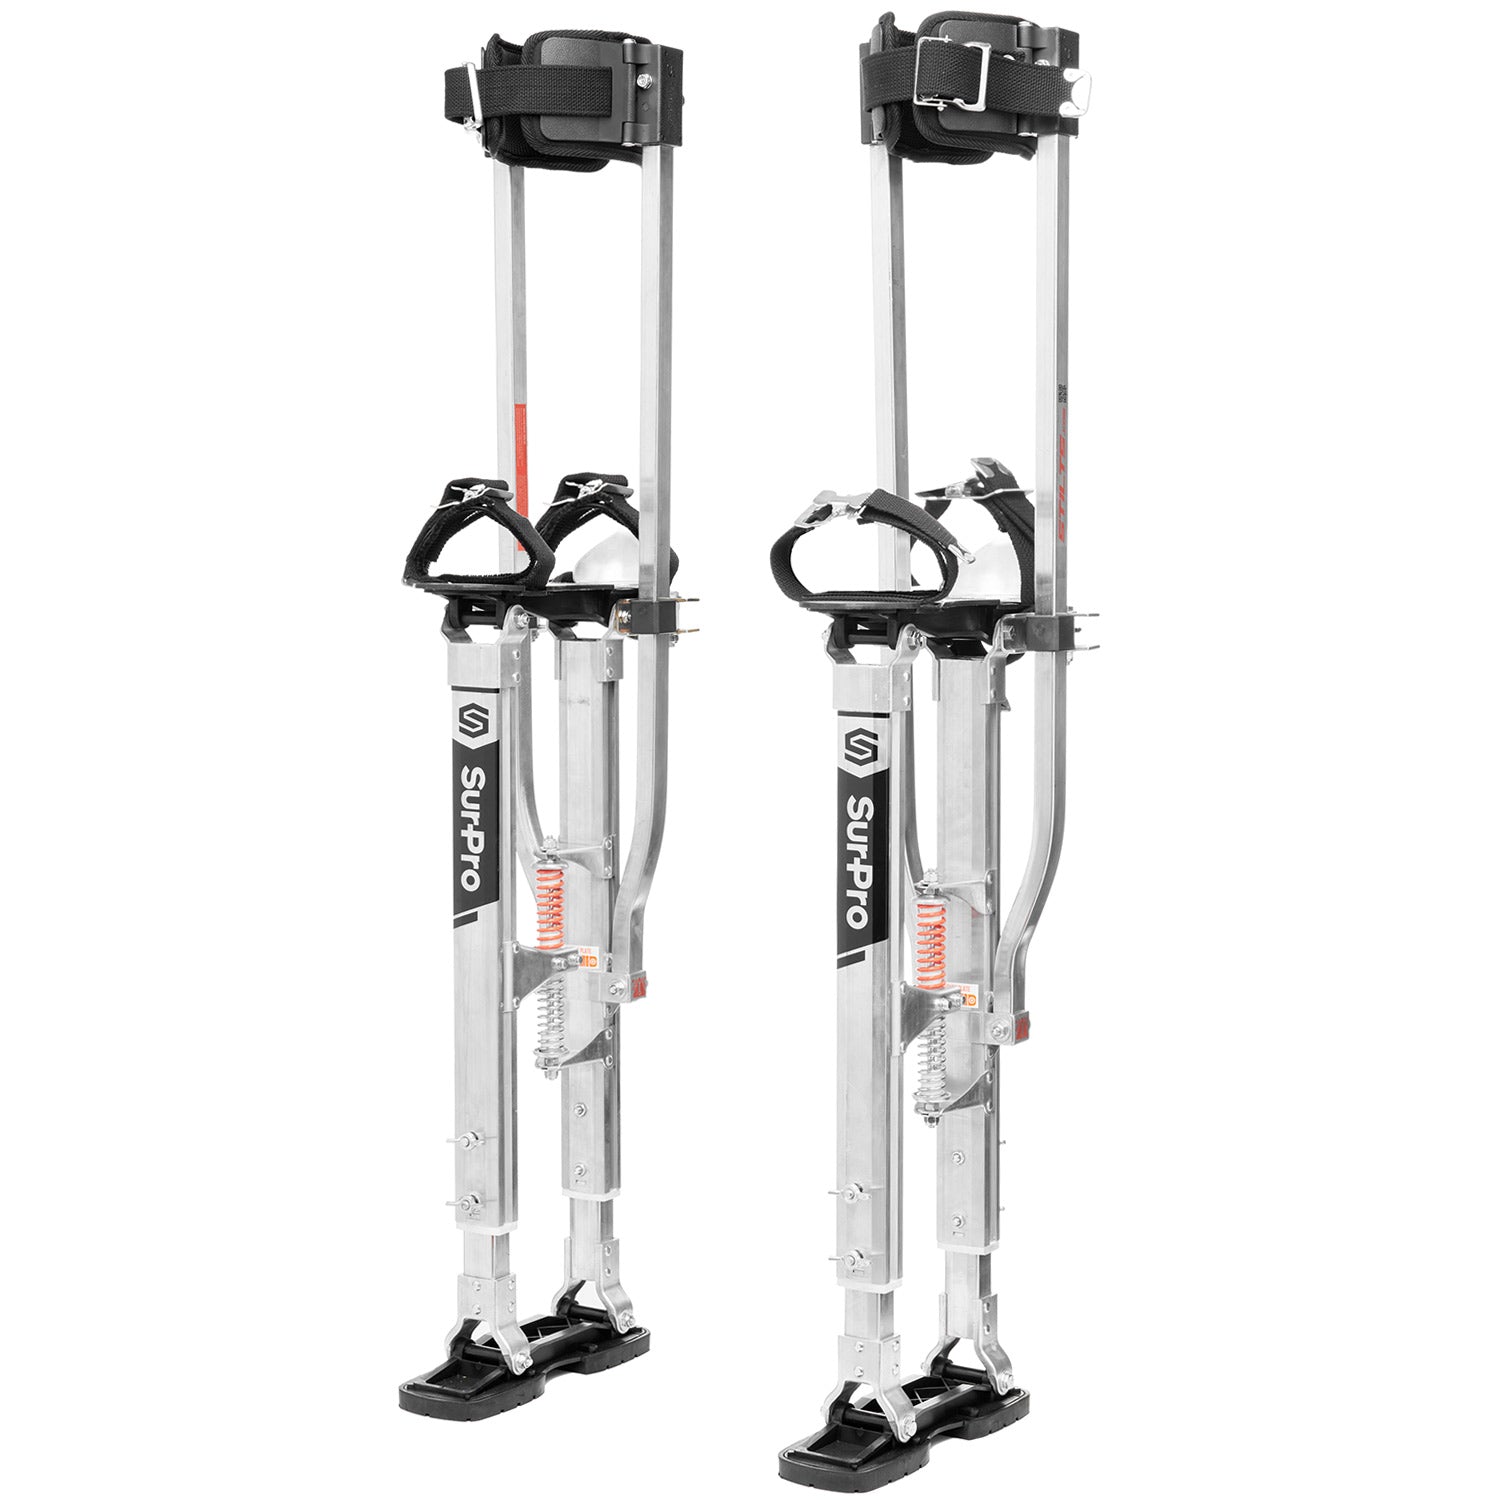 S2 Aluminum Drywall Stilts offer full wrap around leg bands for best comfort and security